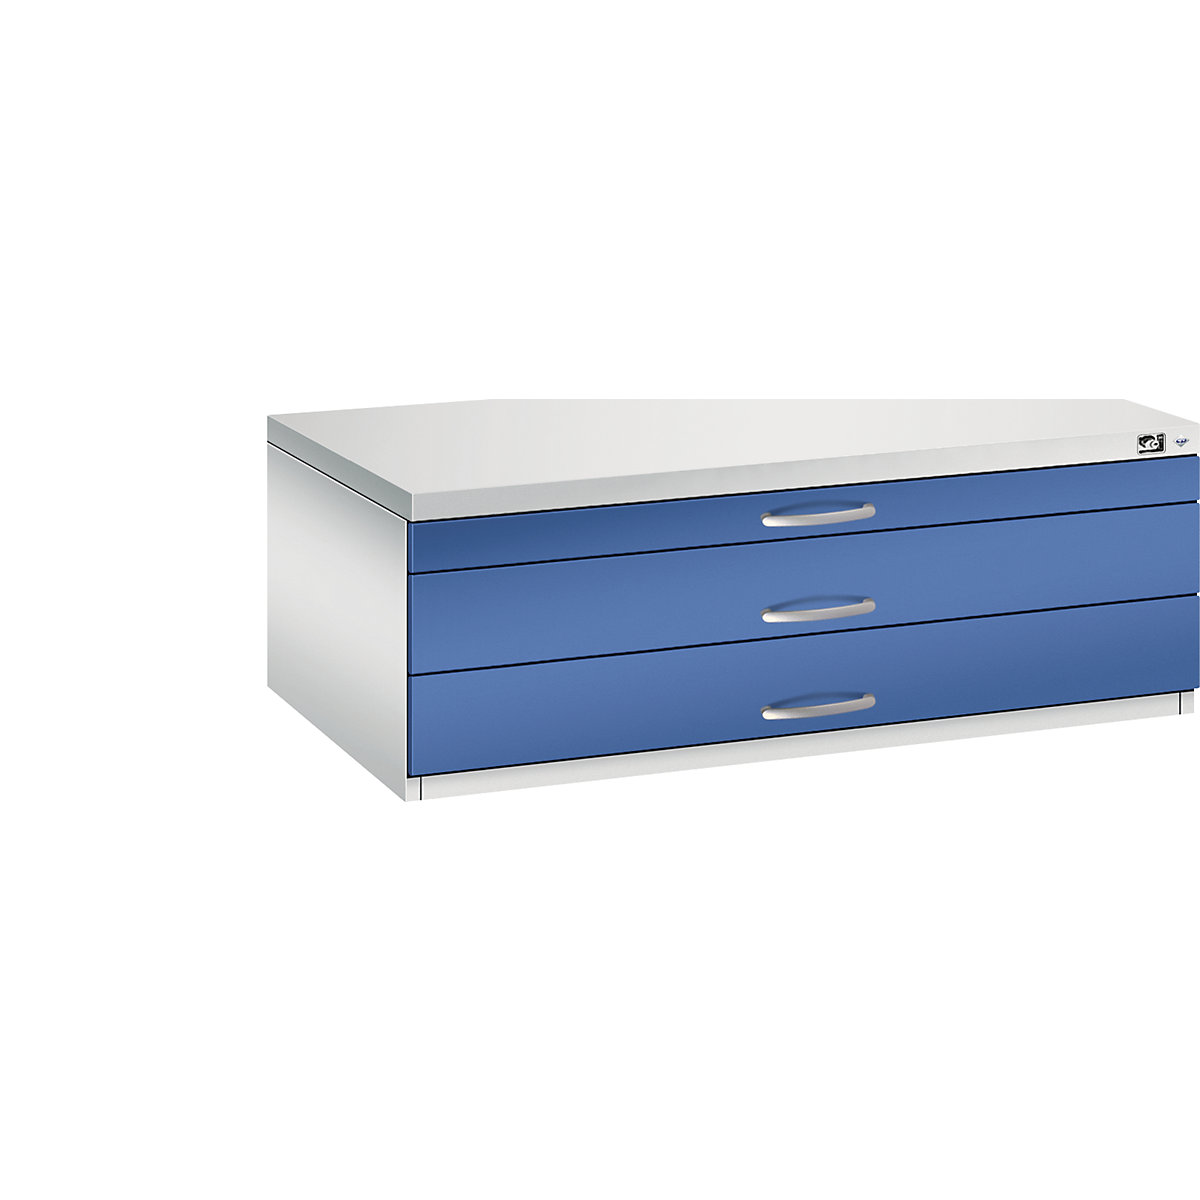 Drawing cabinet – C+P, A1, 3 drawers, height 420 mm, light grey / gentian blue-13